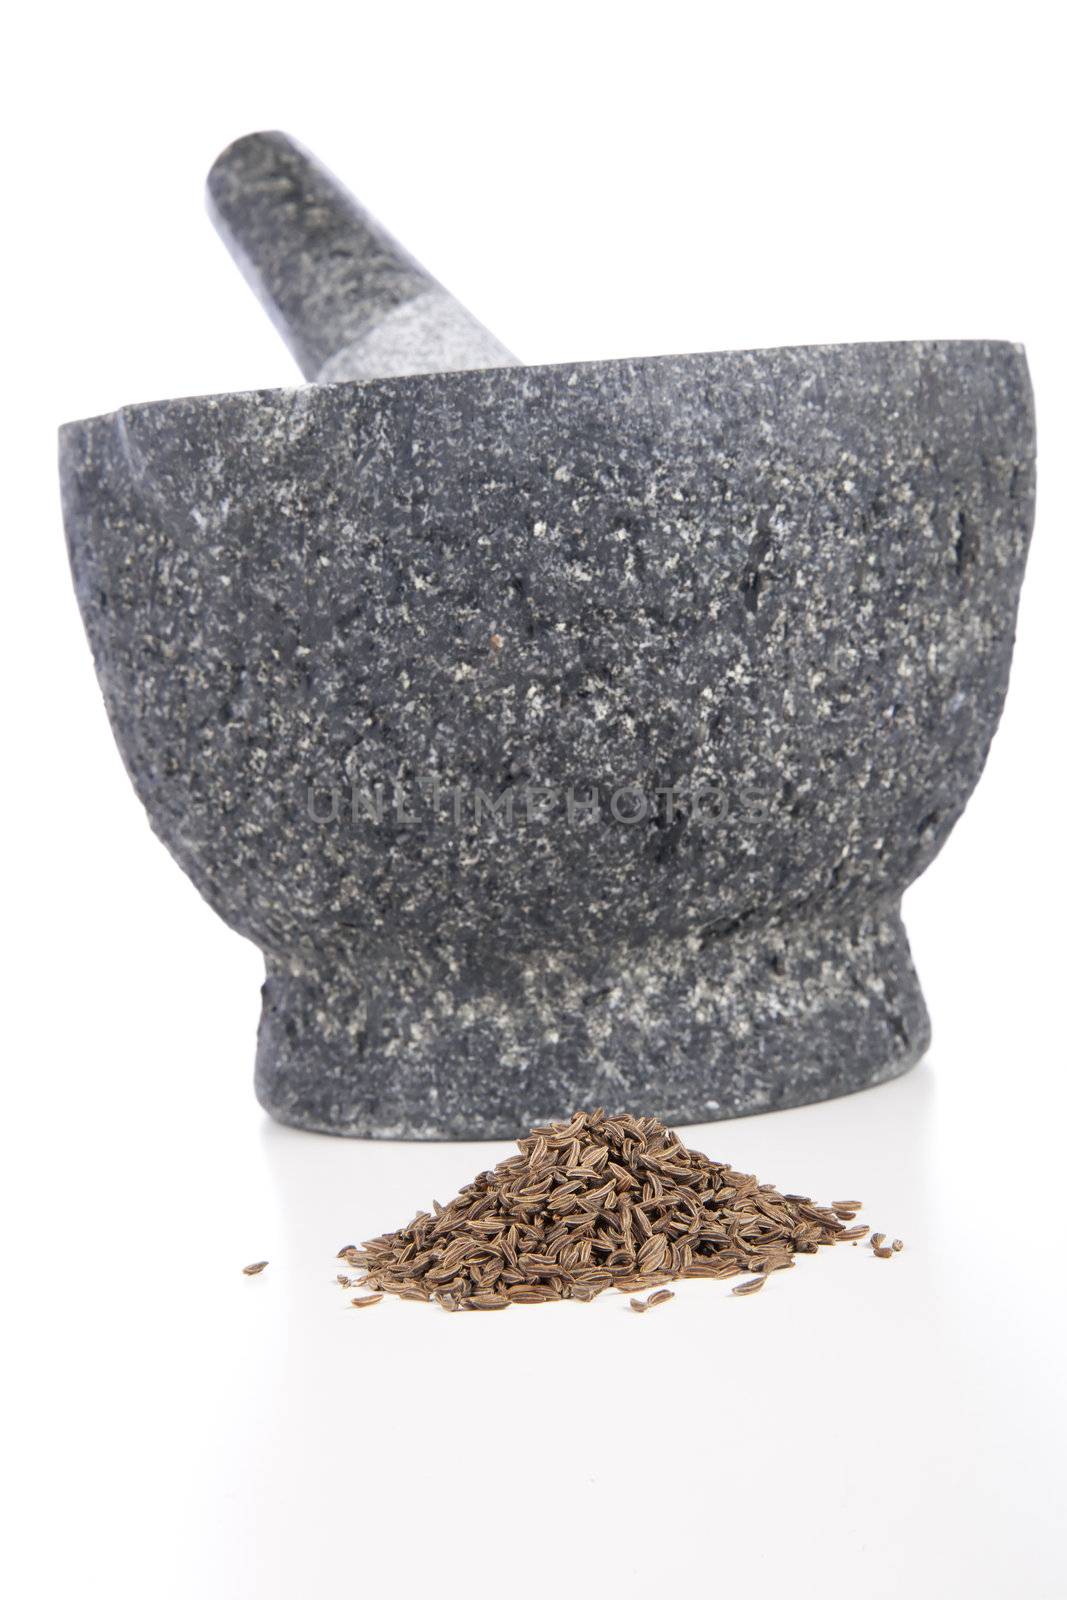 Granite mortar and pestle with fennel seeds on white background.